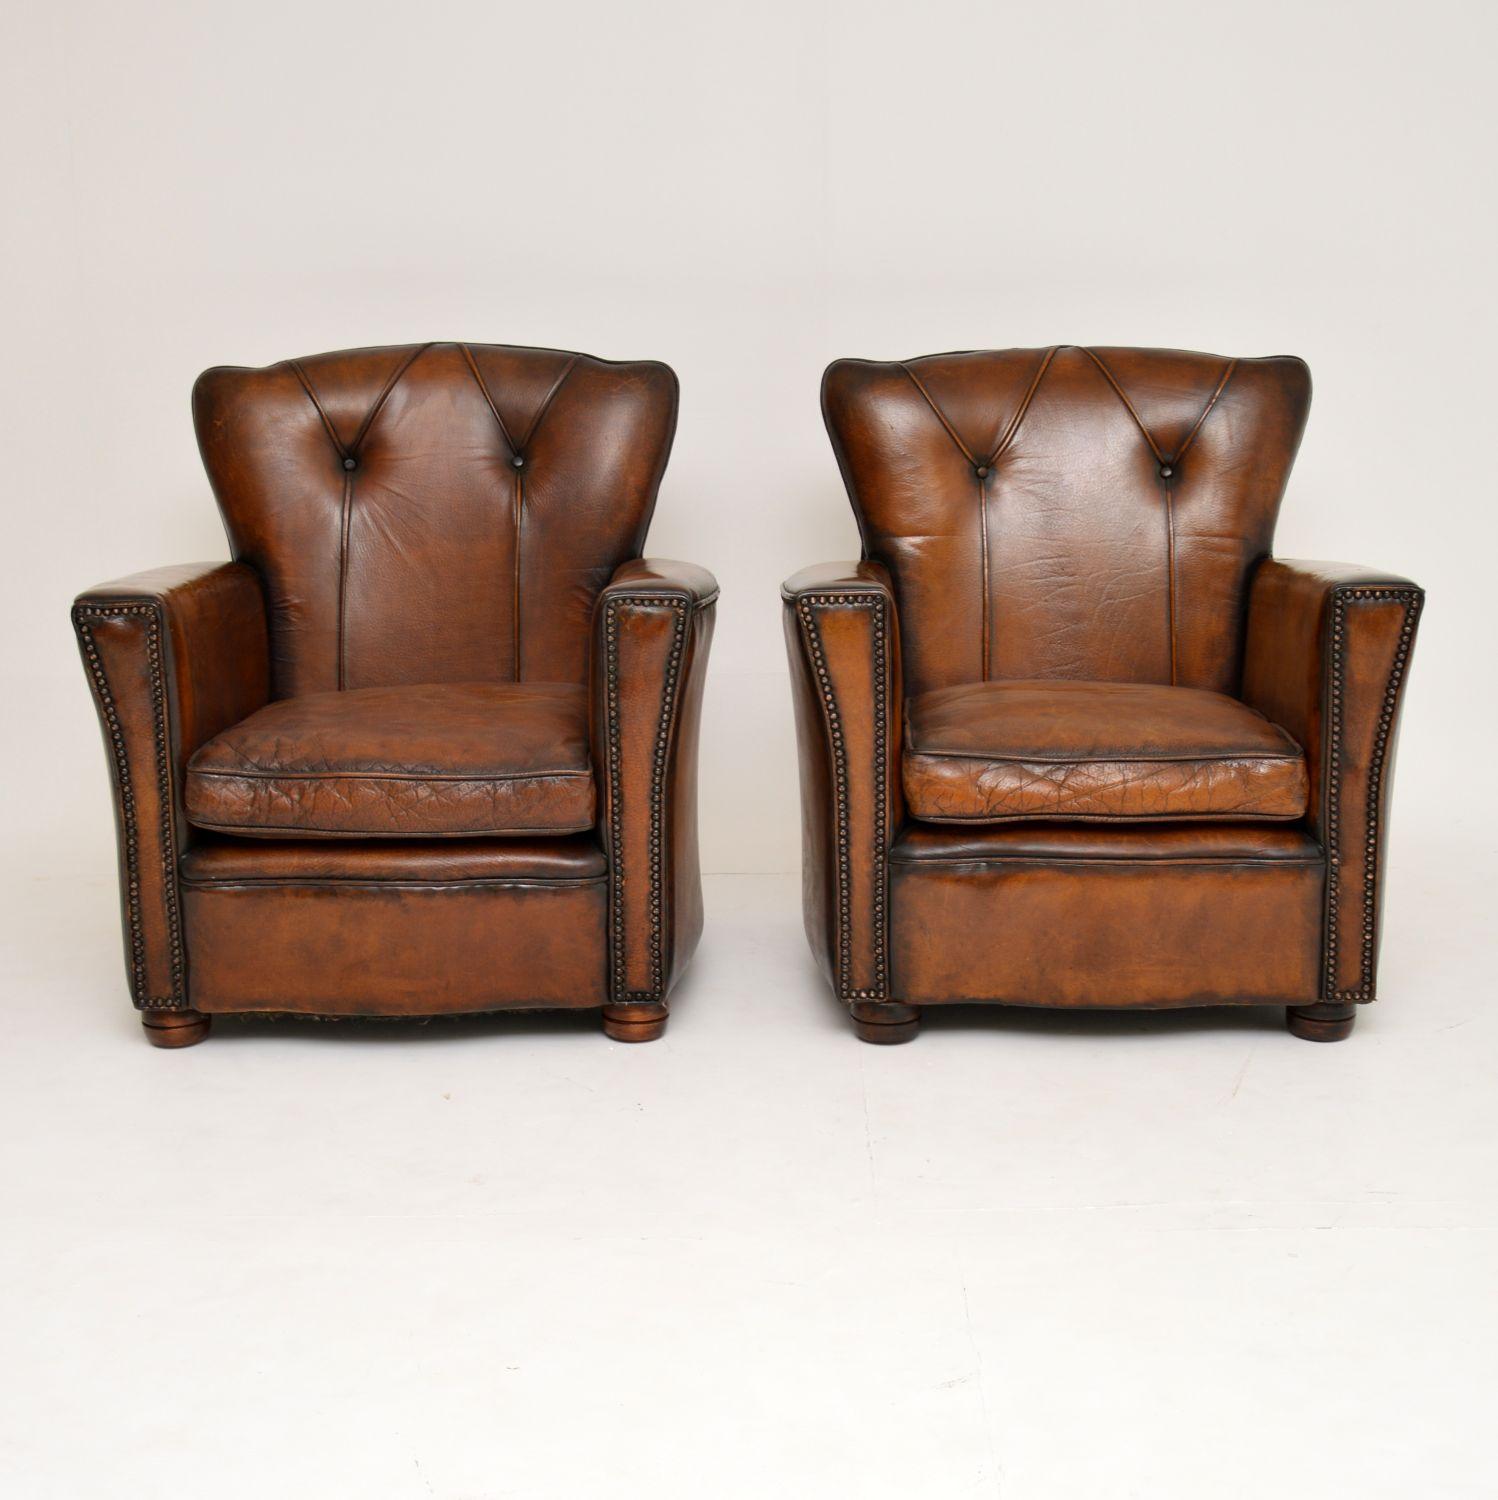 Pair of antique style vintage leather club armchairs in good original condition and with plenty of character.

The leather is in good condition with no rips or holes and has just been professionally cleaned and polished by our leather